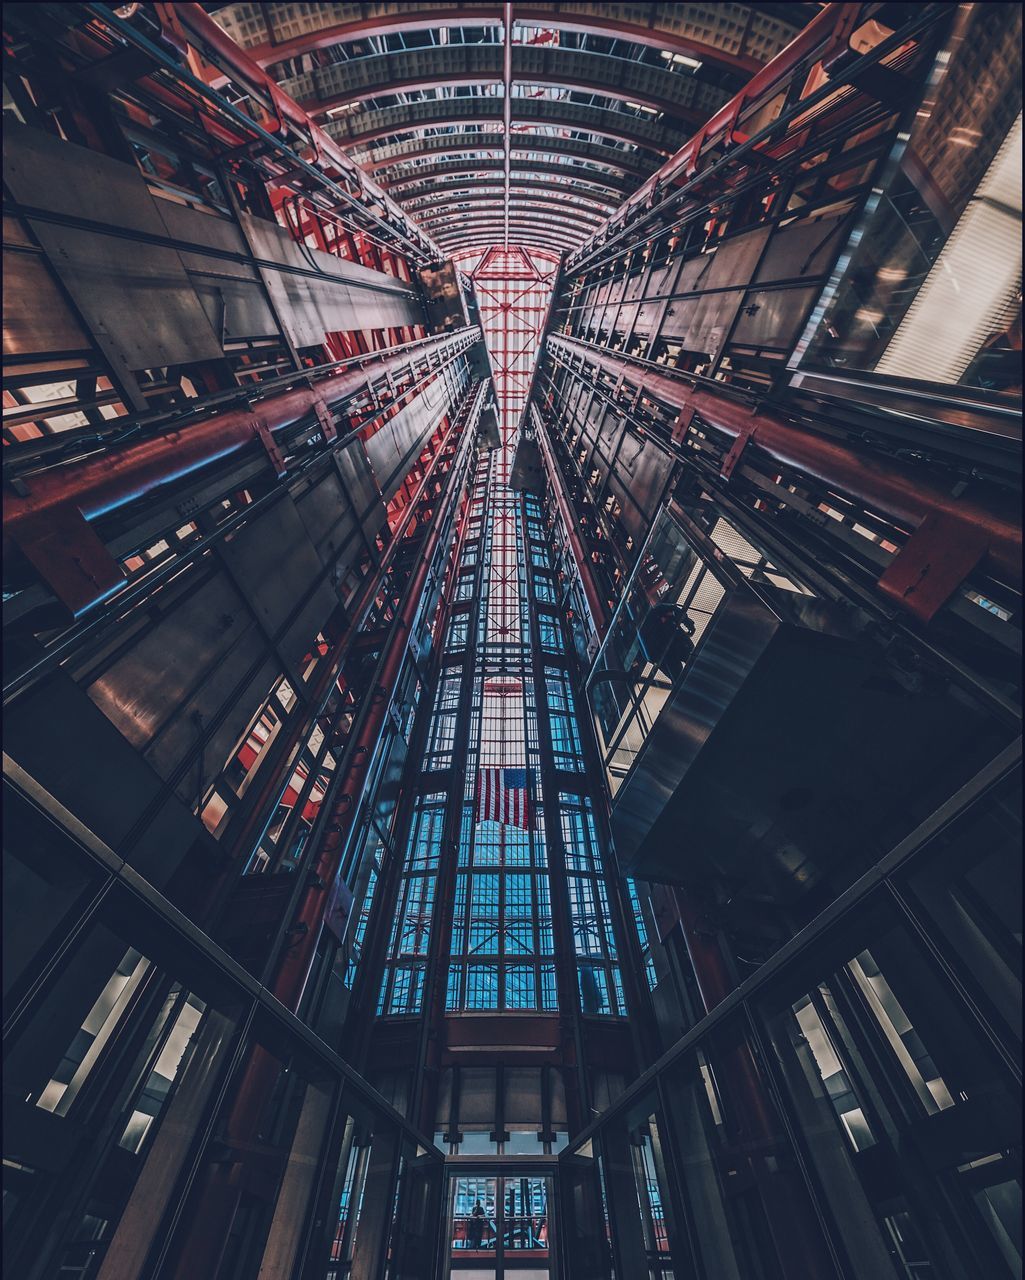 architecture, built structure, low angle view, no people, indoors, modern, building, ceiling, illuminated, tall - high, city, glass - material, pattern, architectural feature, directly below, day, metal, lighting equipment, skyscraper, luxury